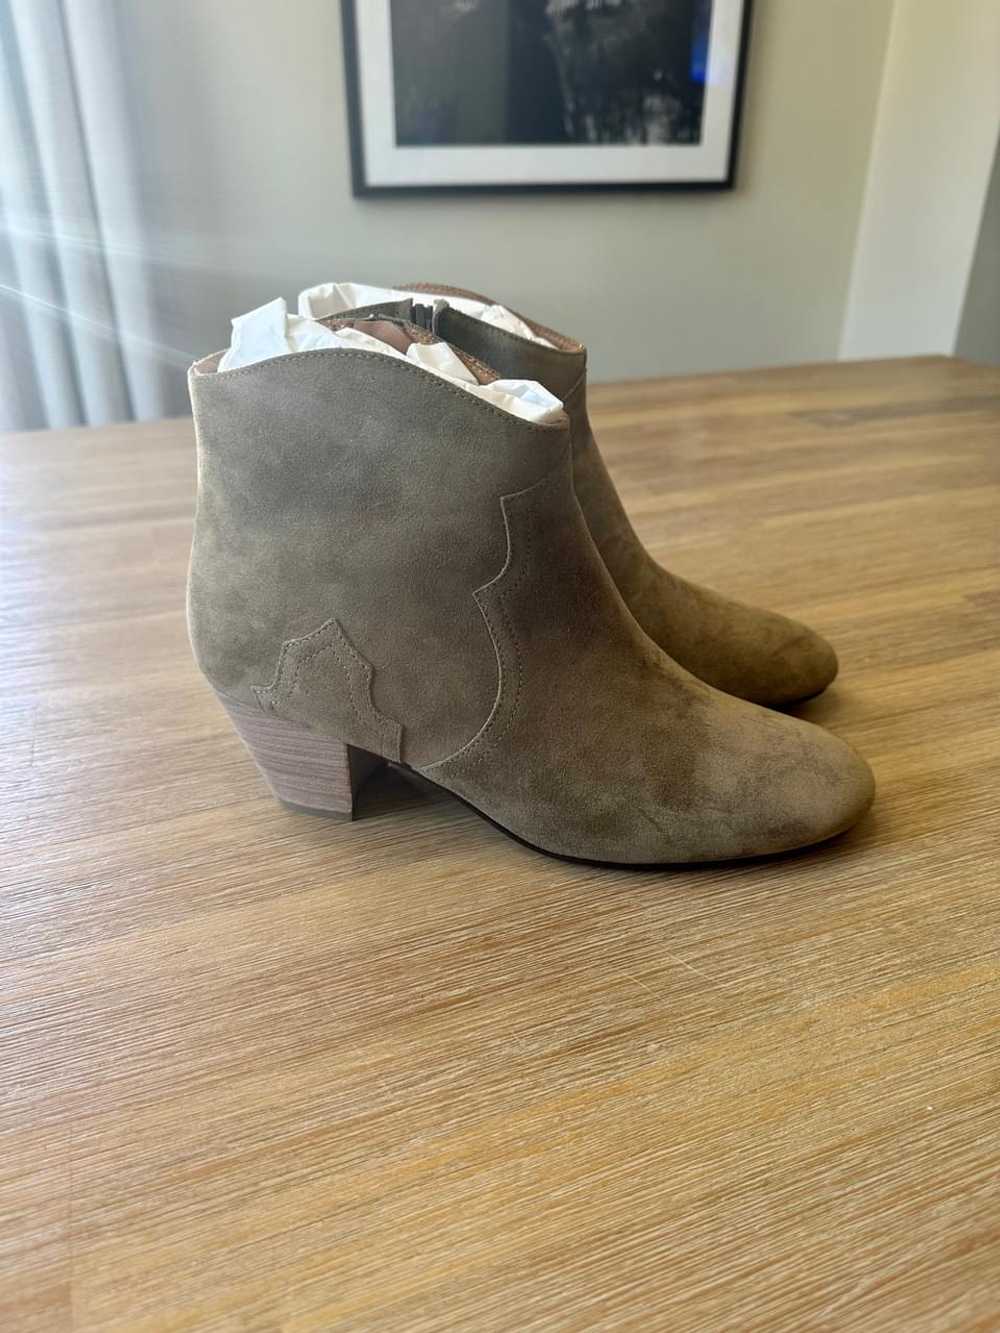 Isabel Marant Dicker Boots (8.5) - image 2